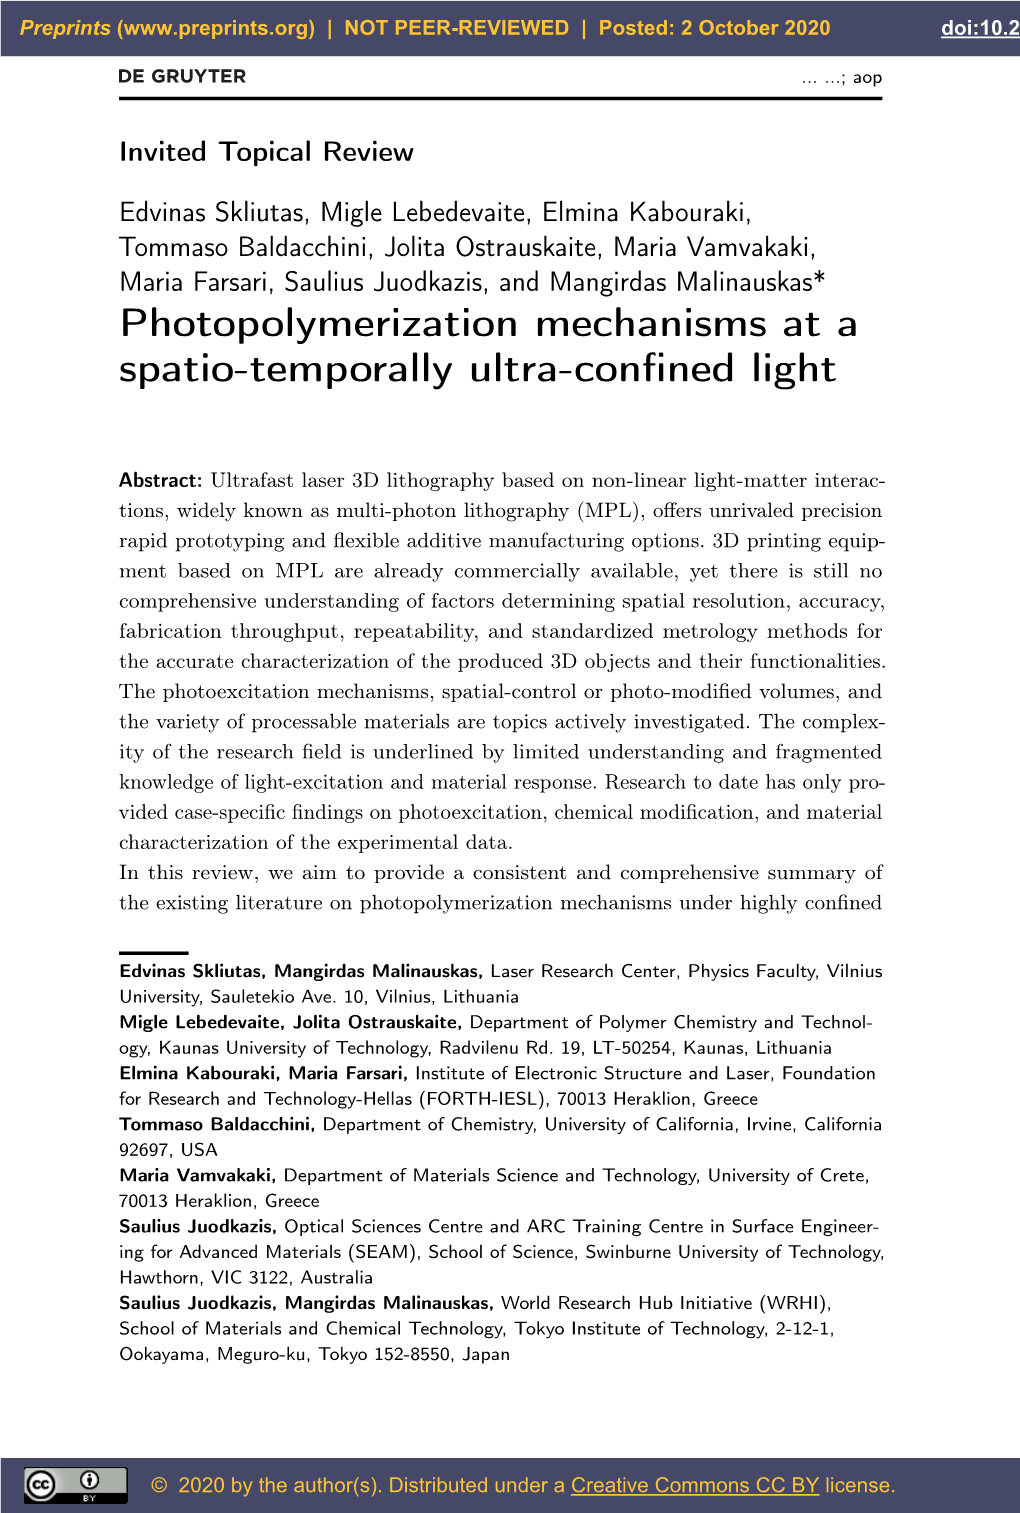 Photopolymerization Mechanisms at a Spatio-Temporally Ultra-Confined Light